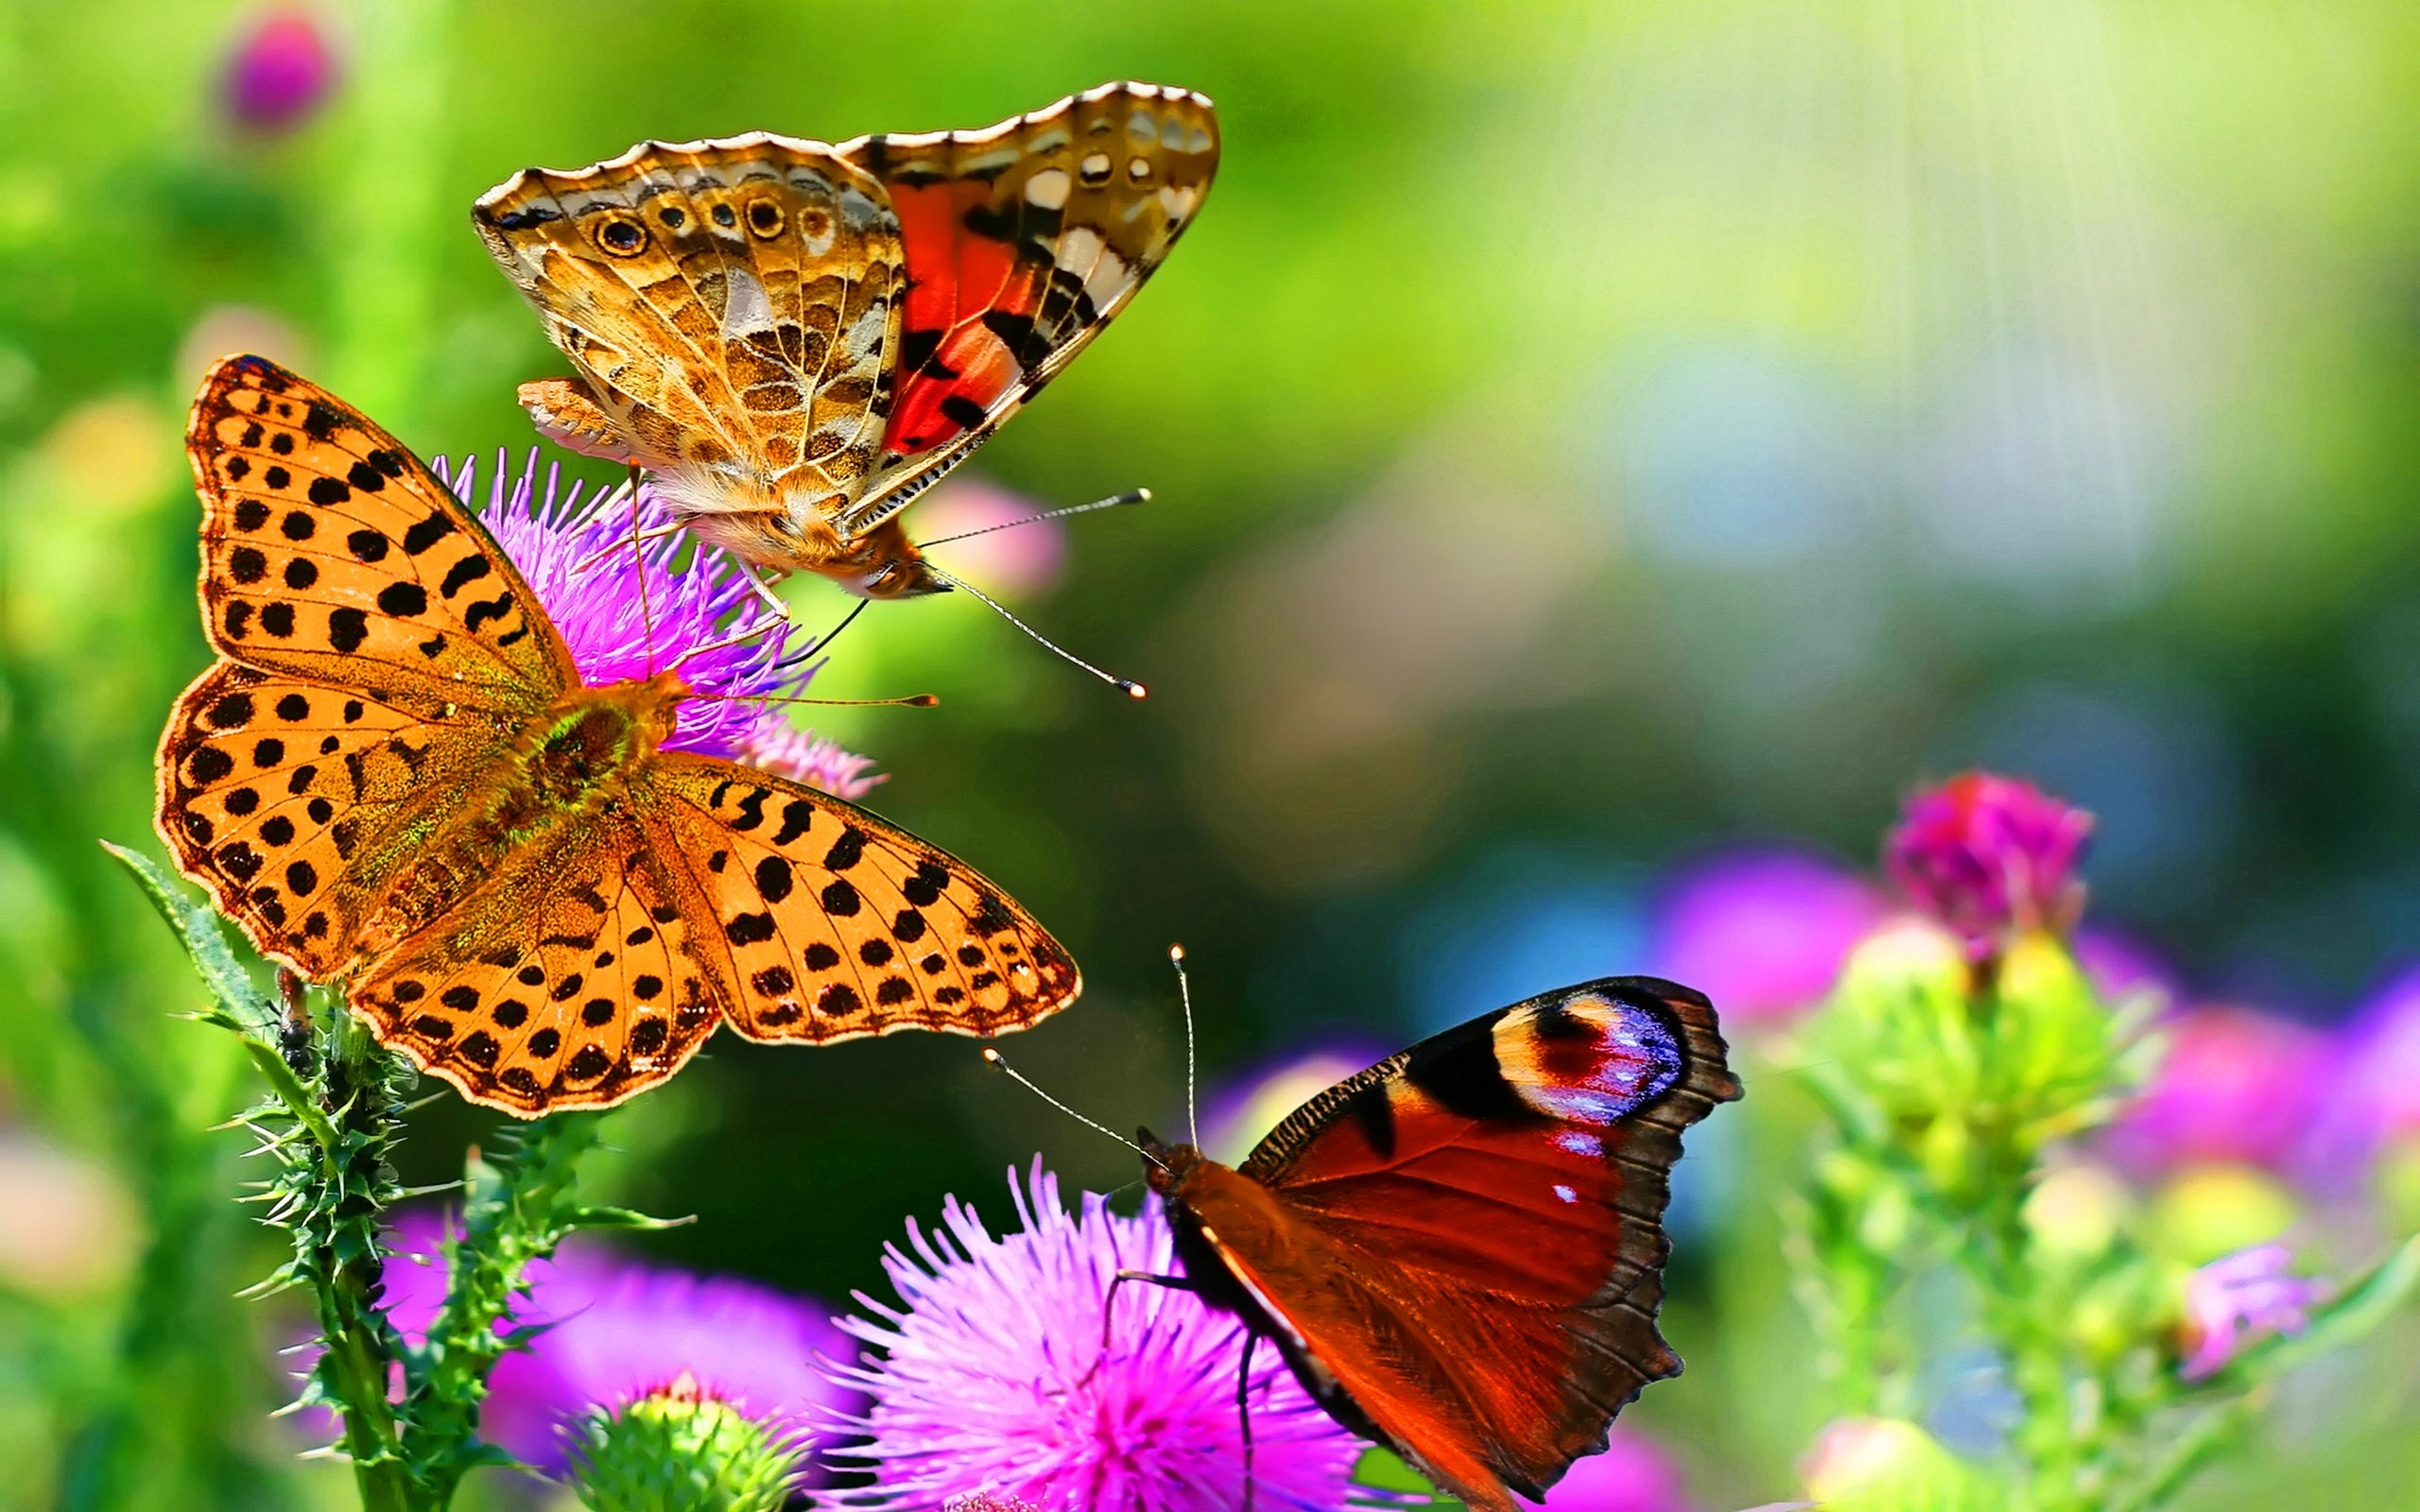 General 2560x1600 butterfly animals insect colorful wildlife flowers pink flowers plants